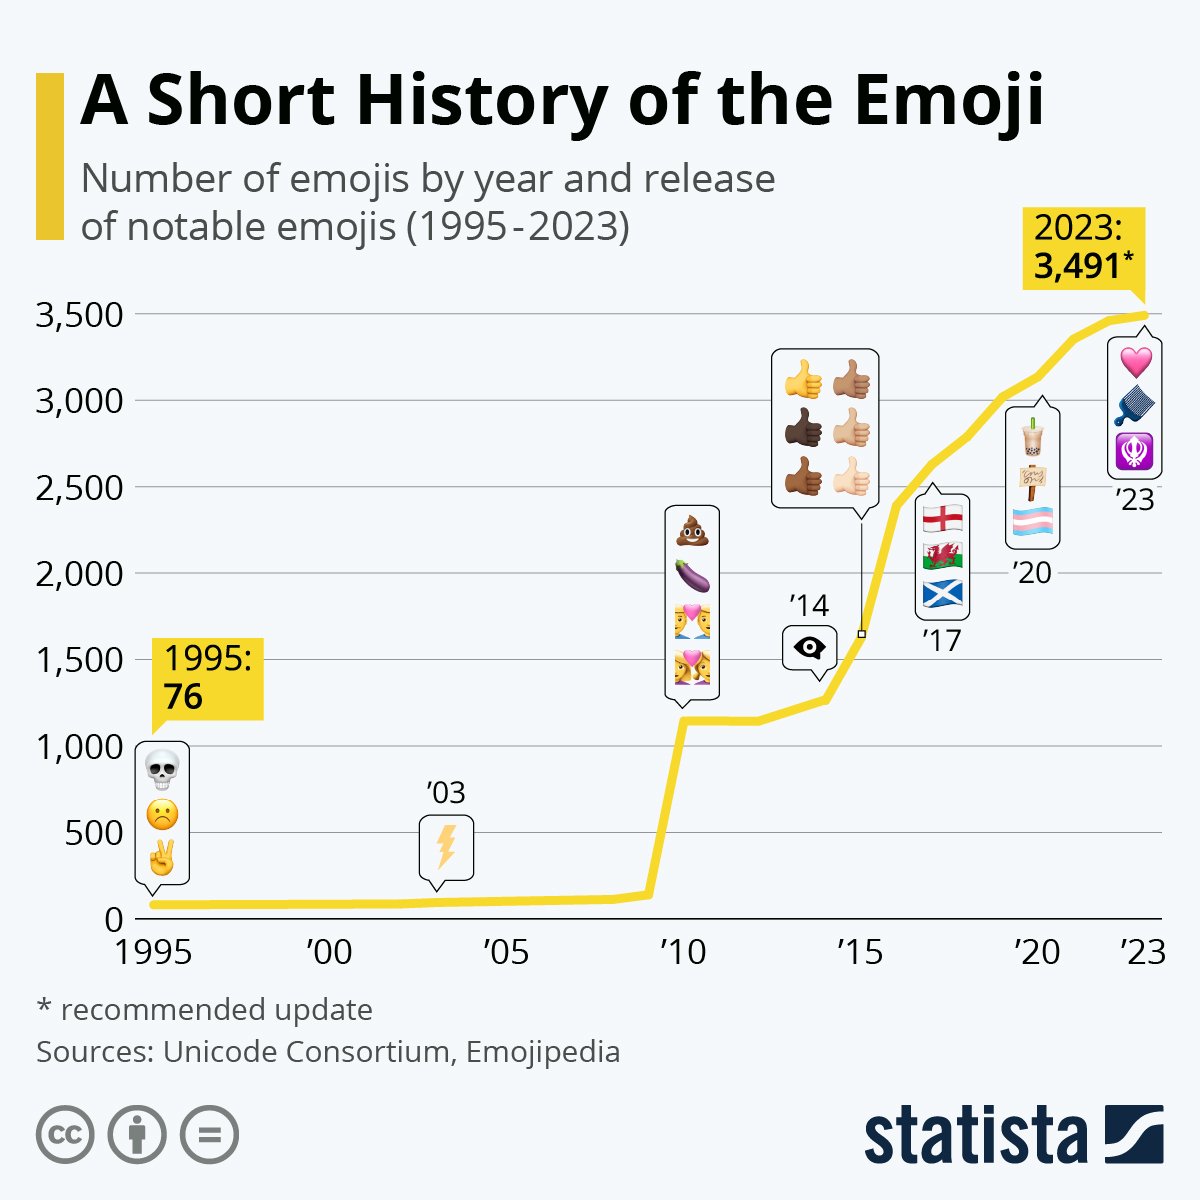 A Short History of the Emoji: Number of emojis by year and release of notable emojis (1995-2023)